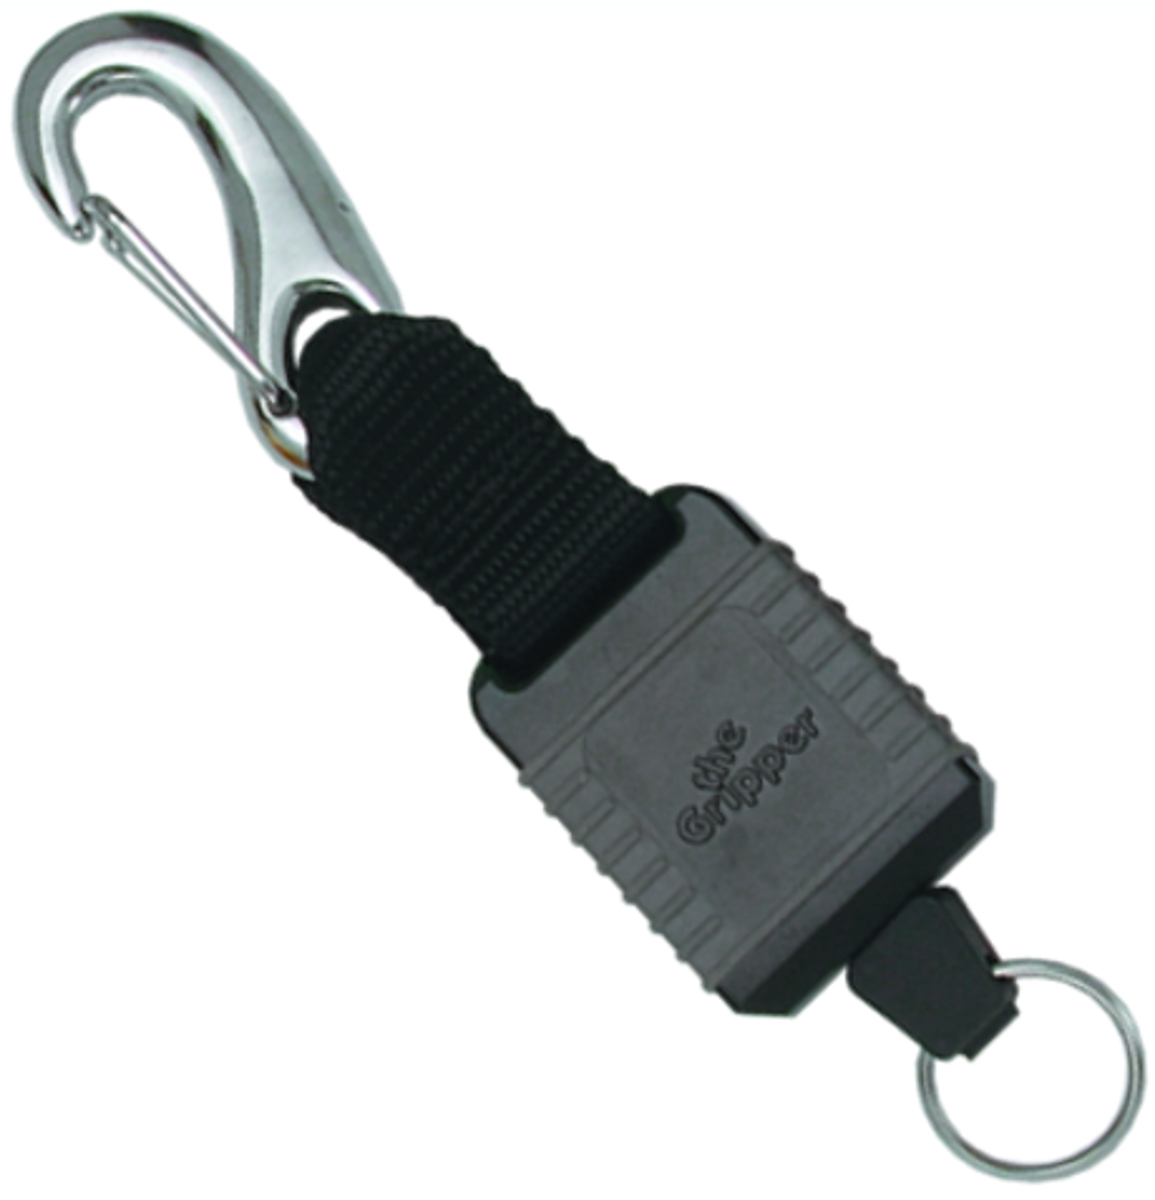 Innovative The Gripper Junior Stainless Steel Snap Version